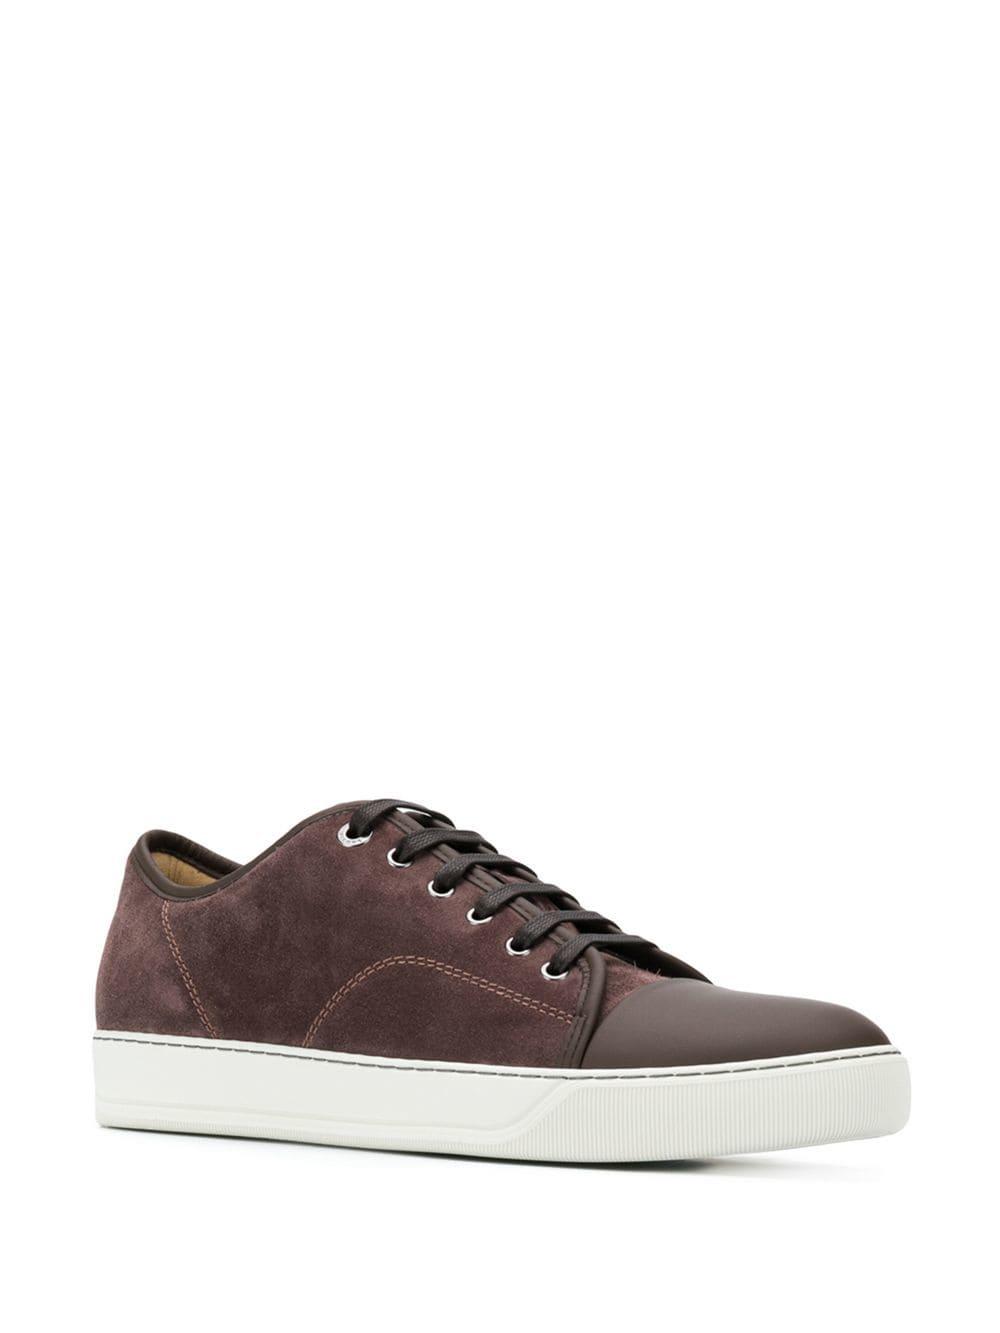 Lanvin Sneakers Chocolate Calf-skin Leather in Brown for Men - Lyst